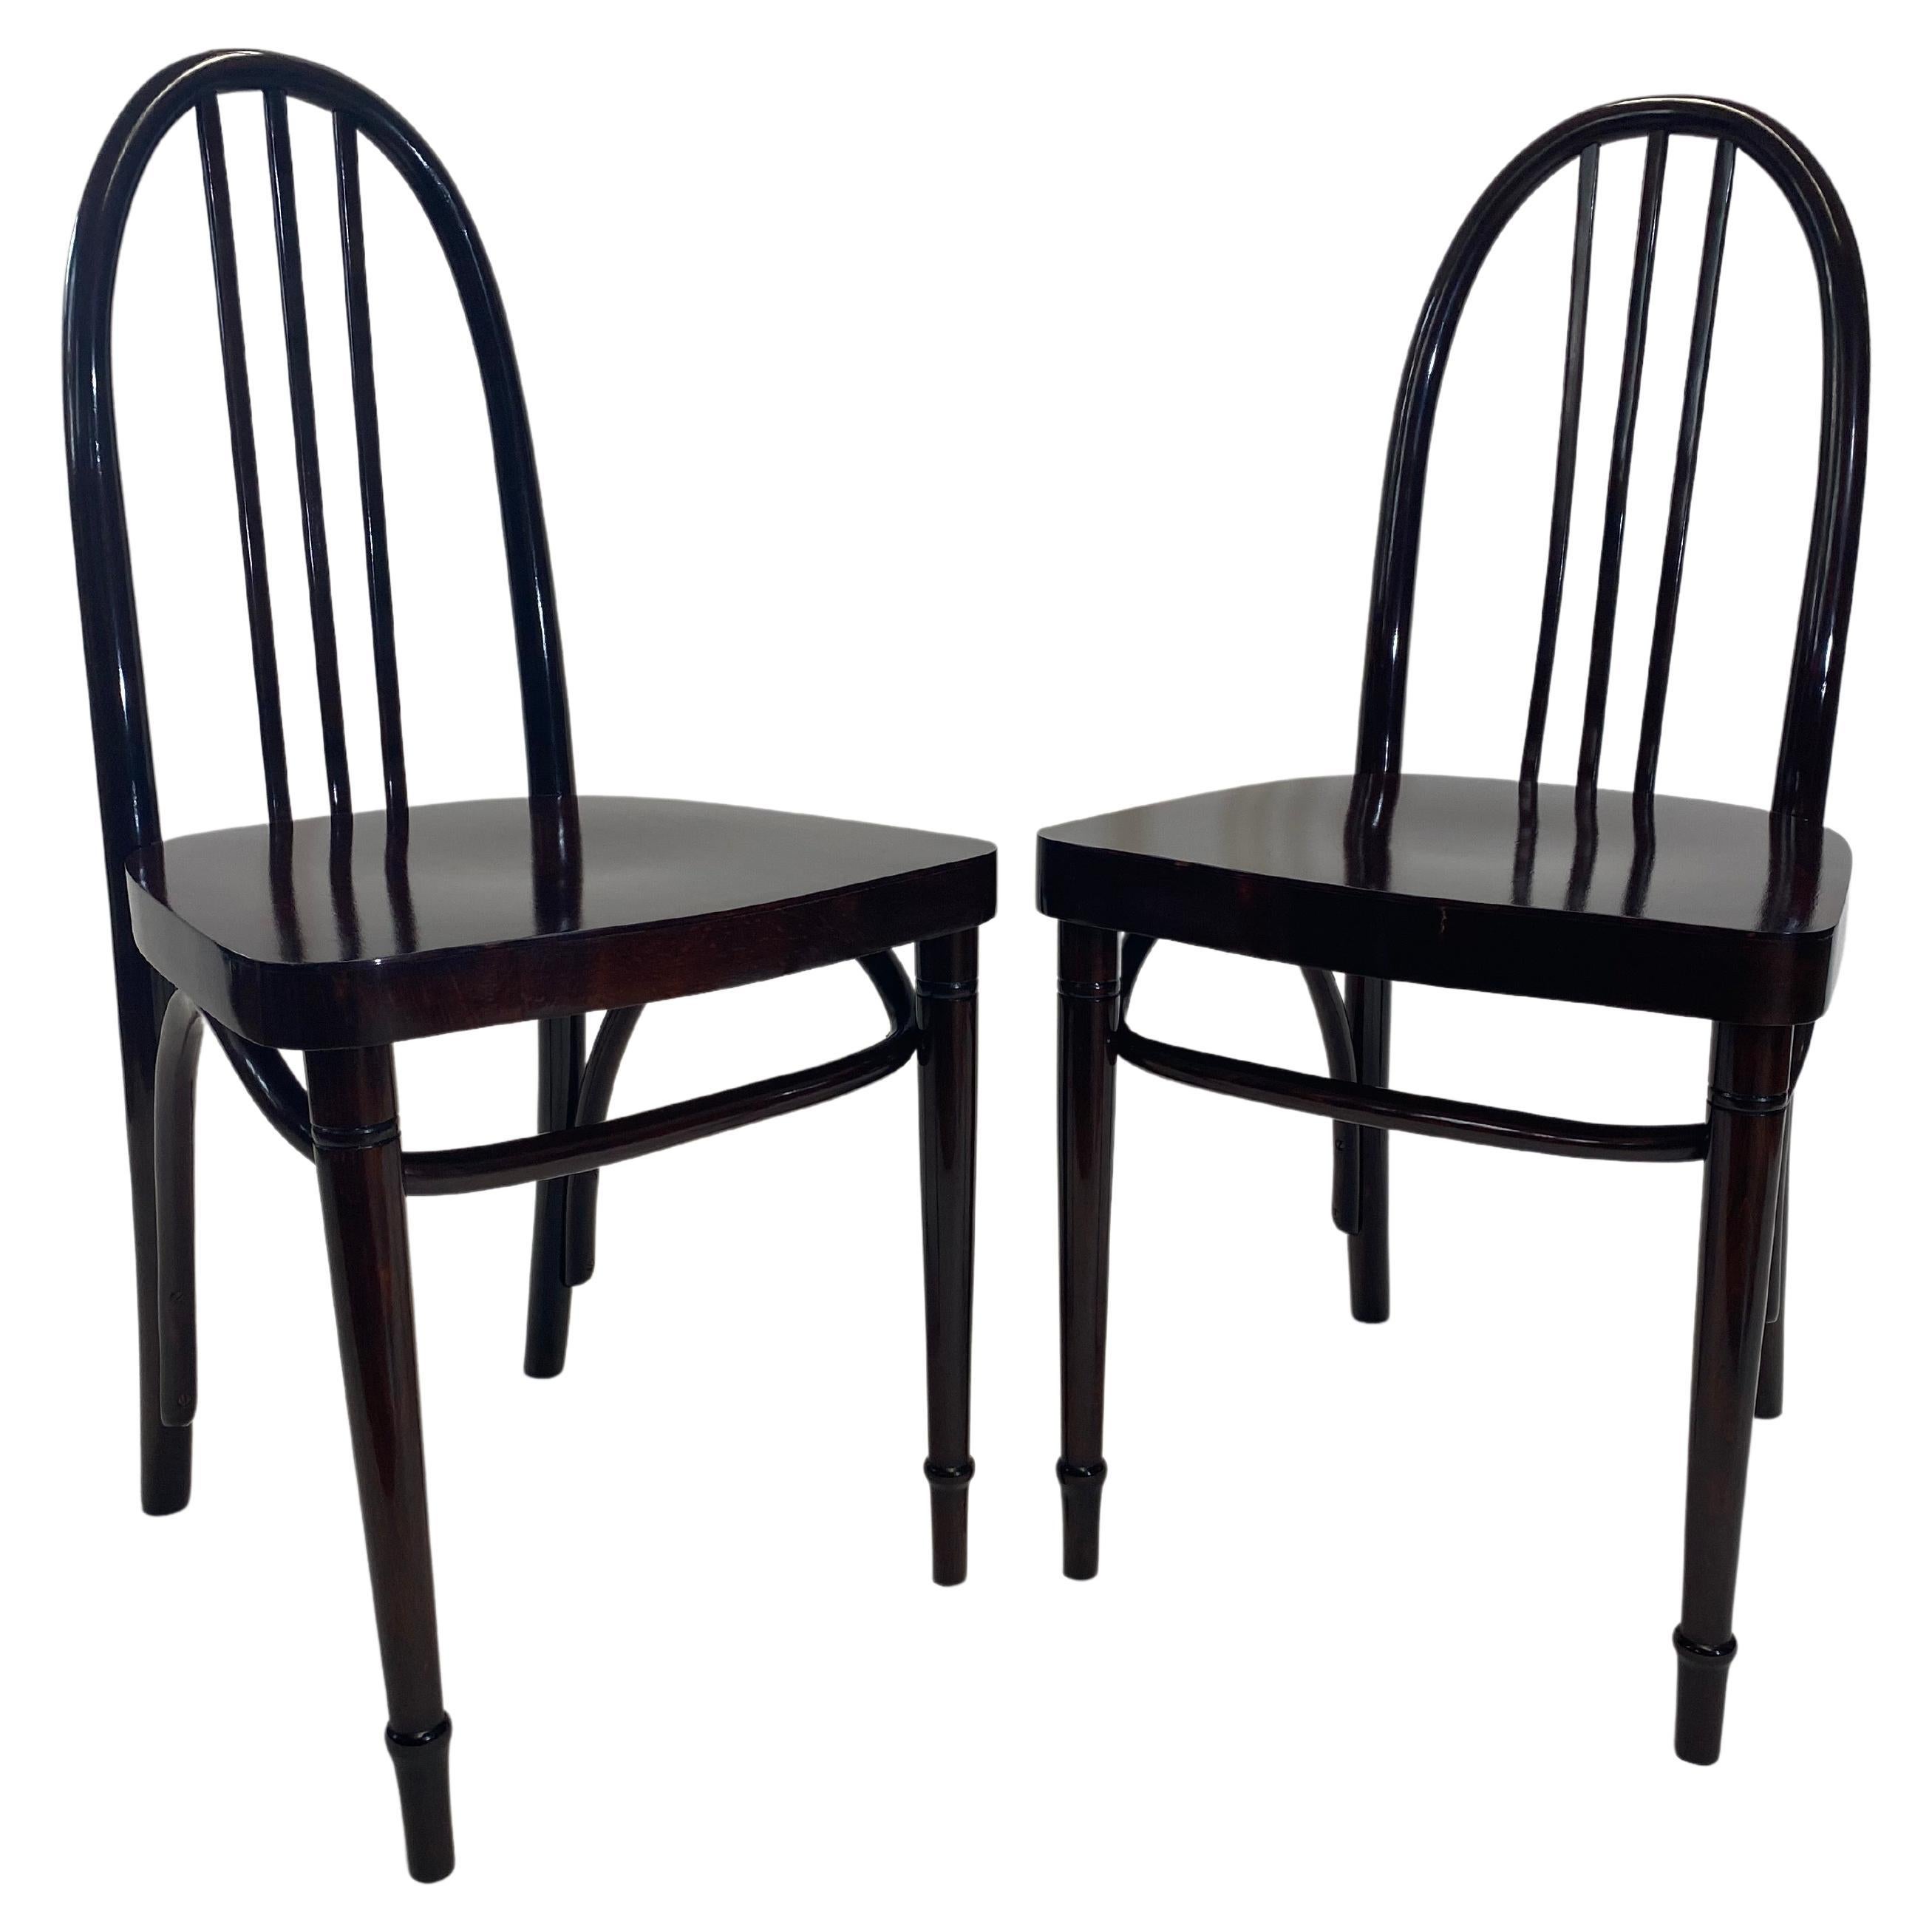 Pair of Secession Josef Hoffmann Chairs Ex. by Thonet